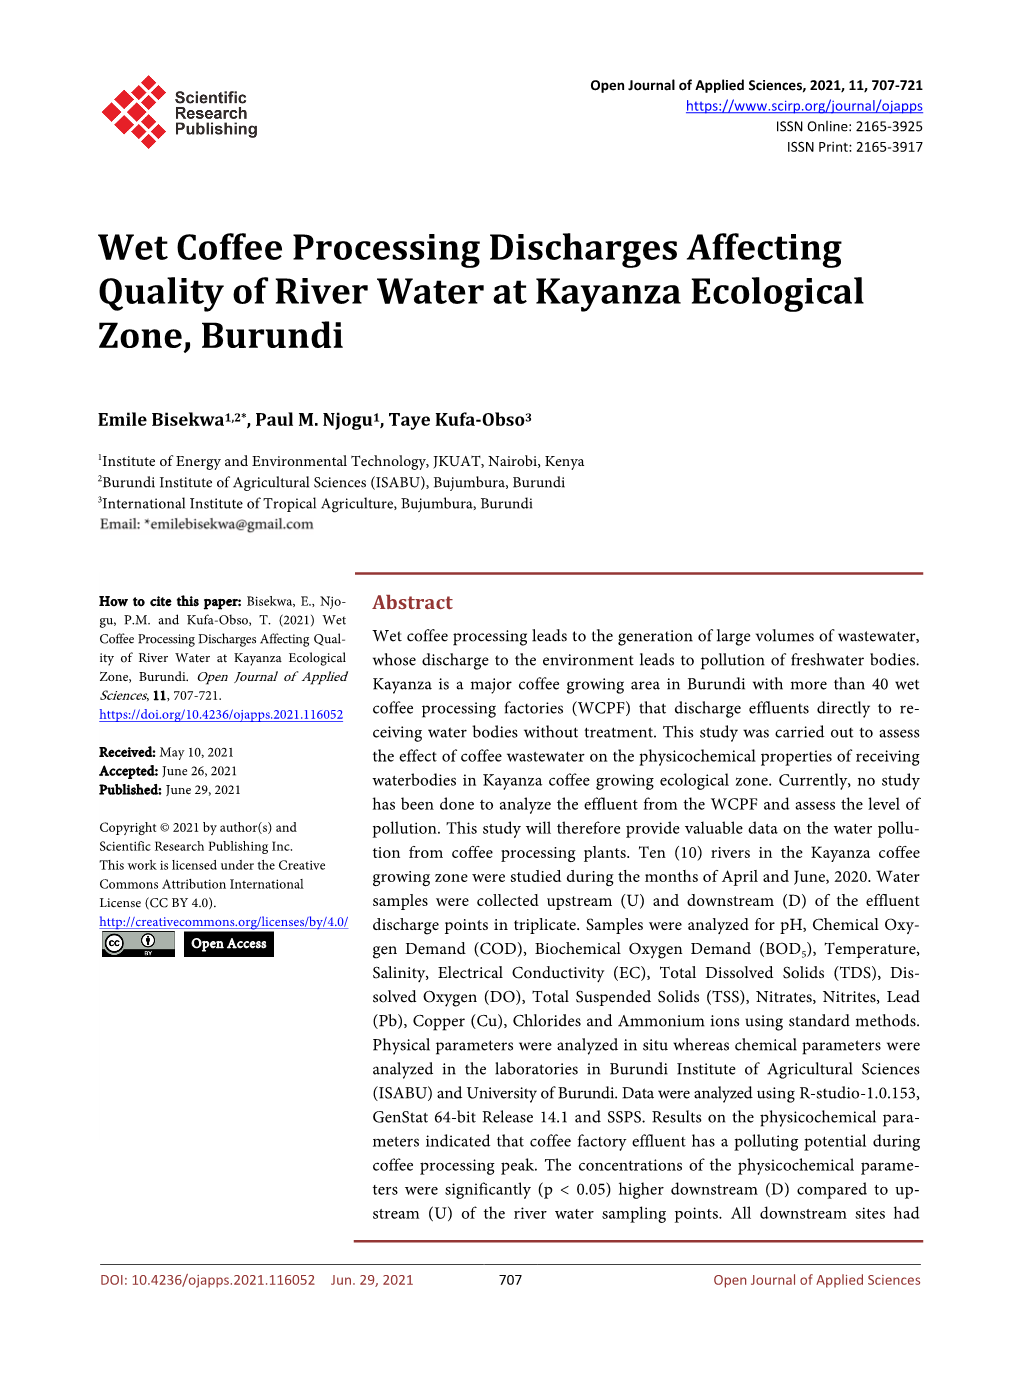 Wet Coffee Processing Discharges Affecting Quality of River Water at Kayanza Ecological Zone, Burundi